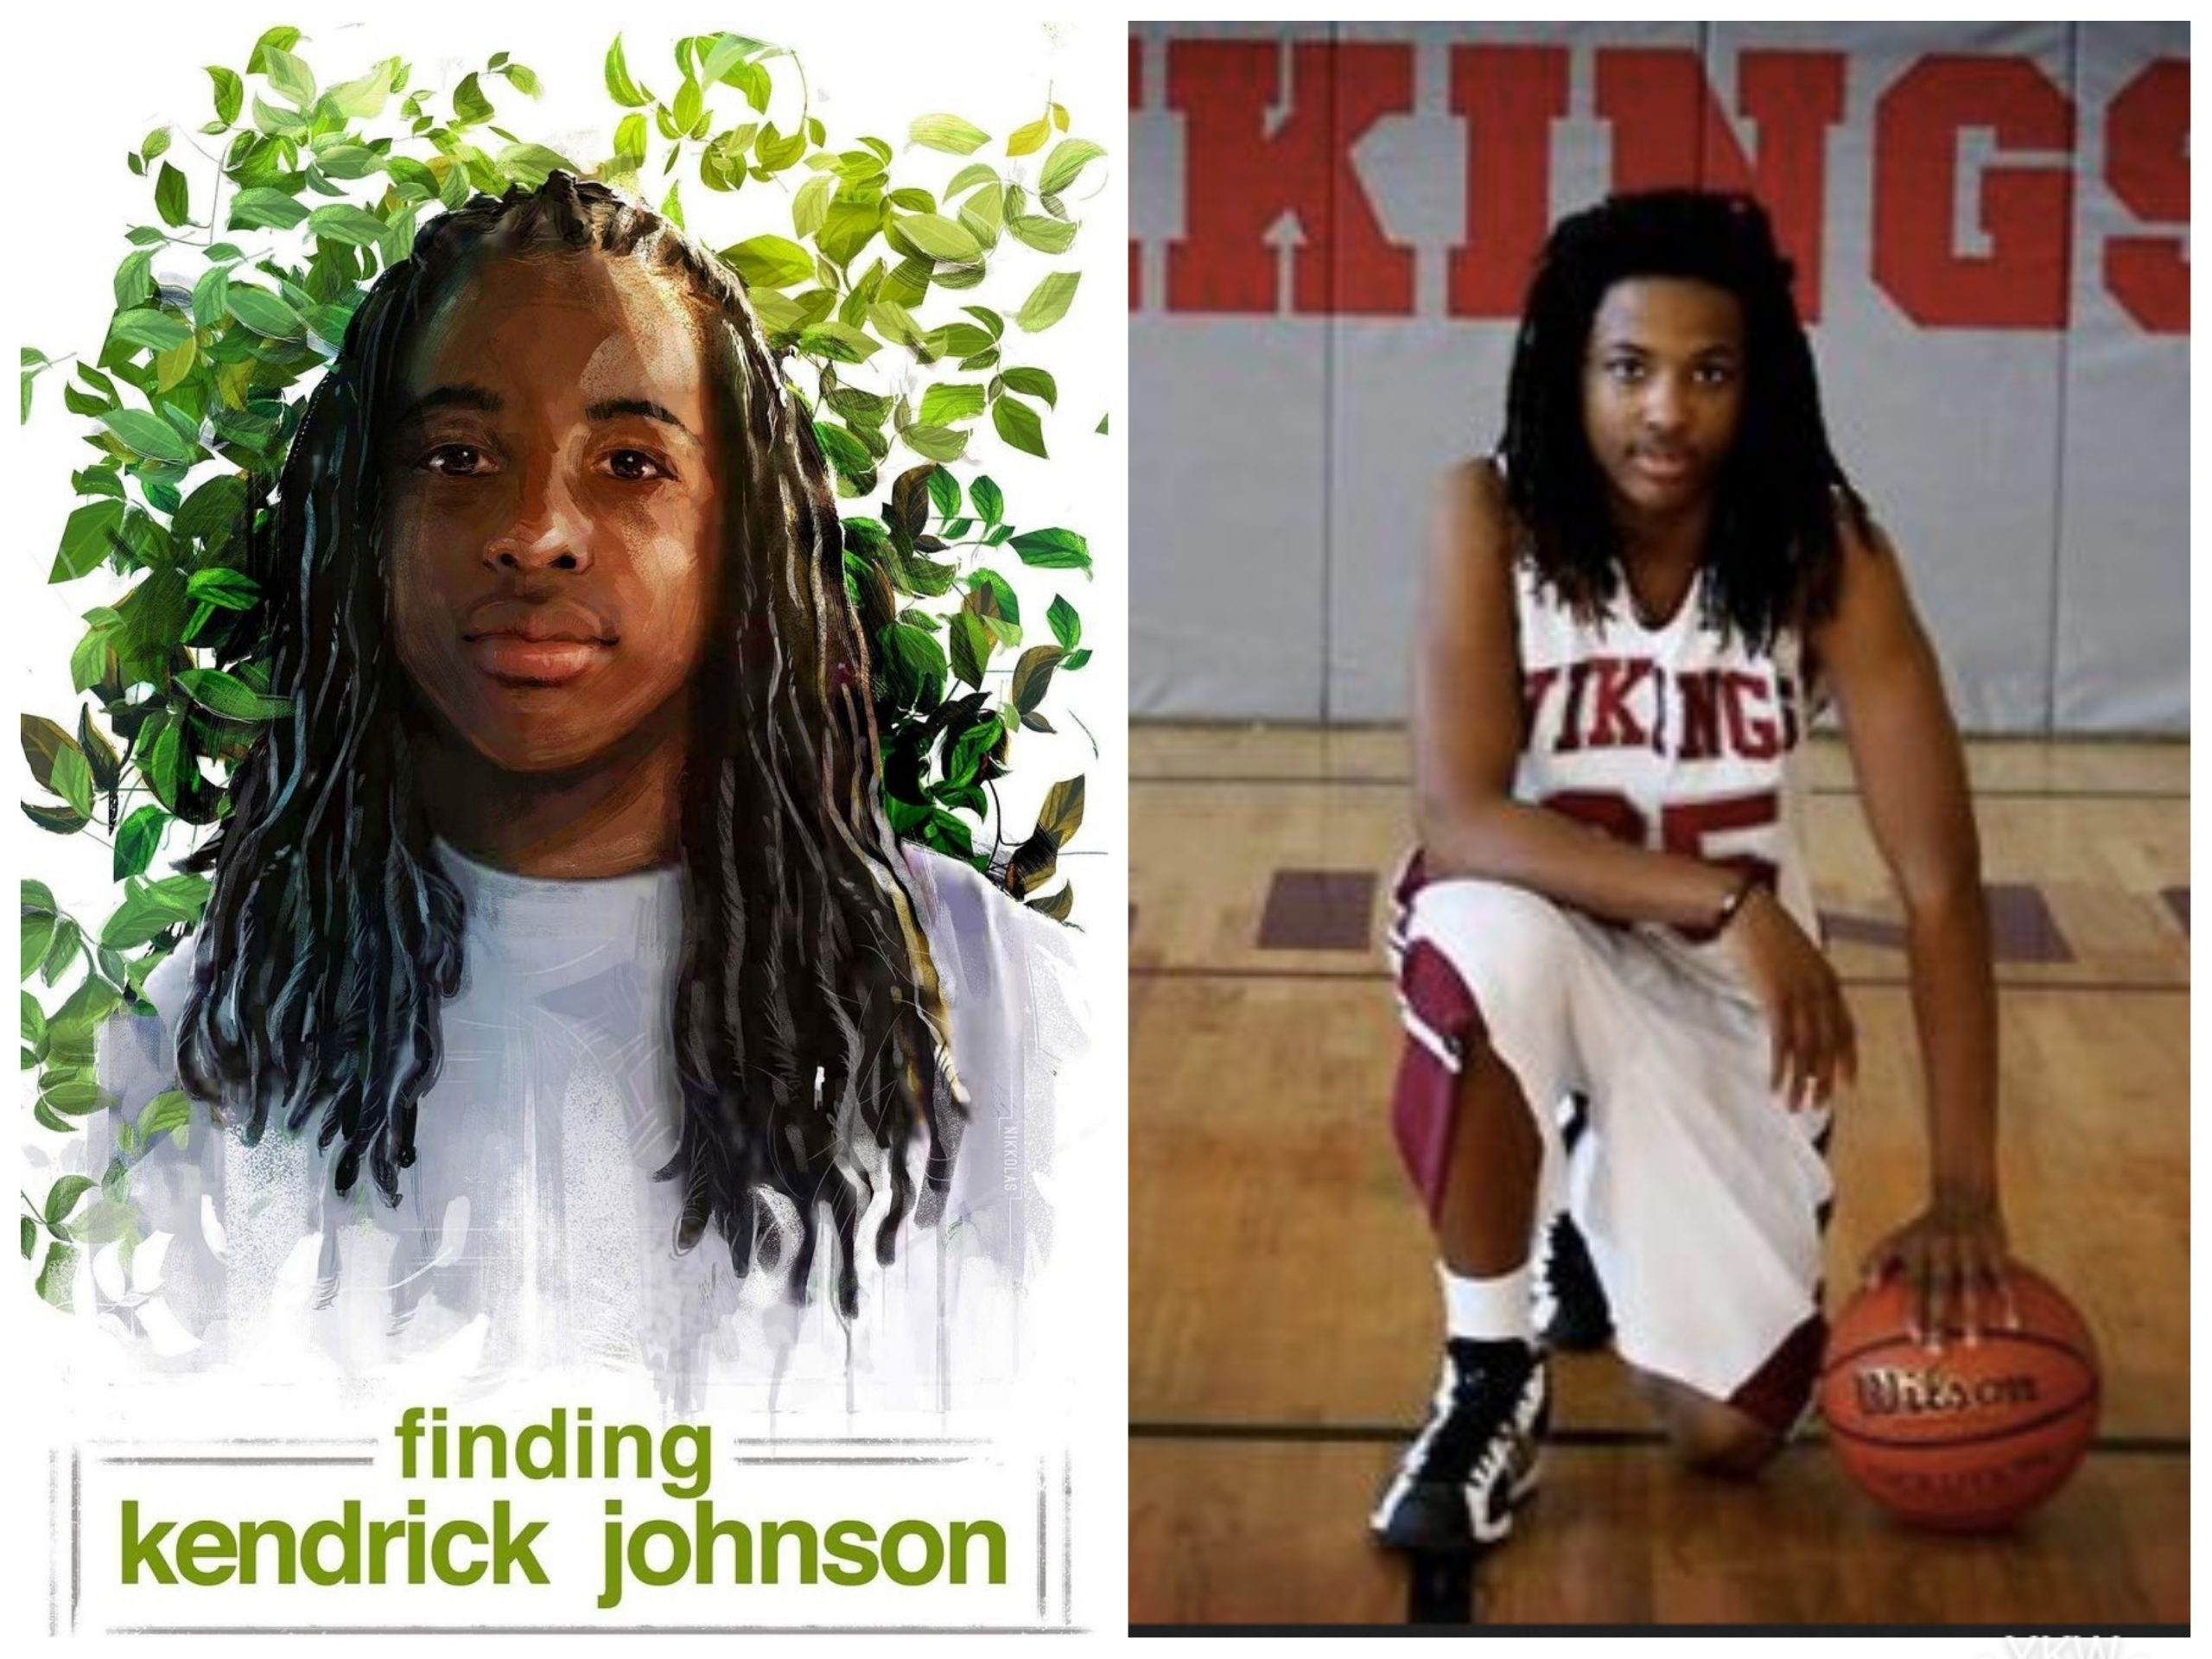 New Film Sheds Light On Kendrick Johnson’s Mysterious Death